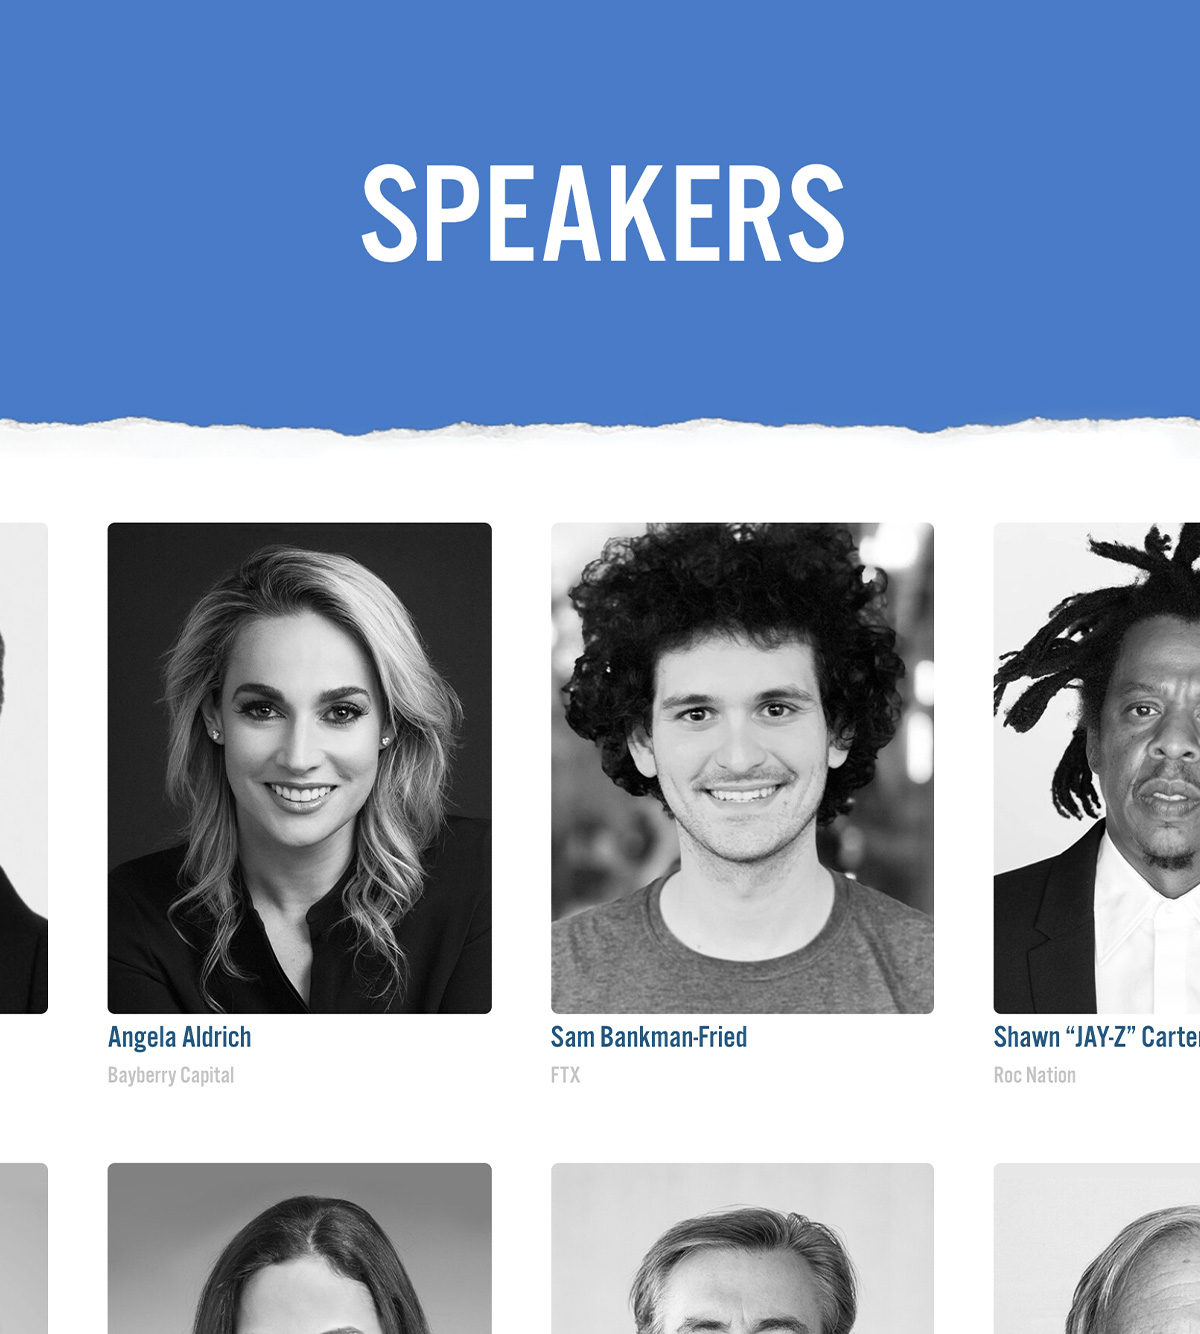 Screenshot of the speakers roster section of the website from the investor conference